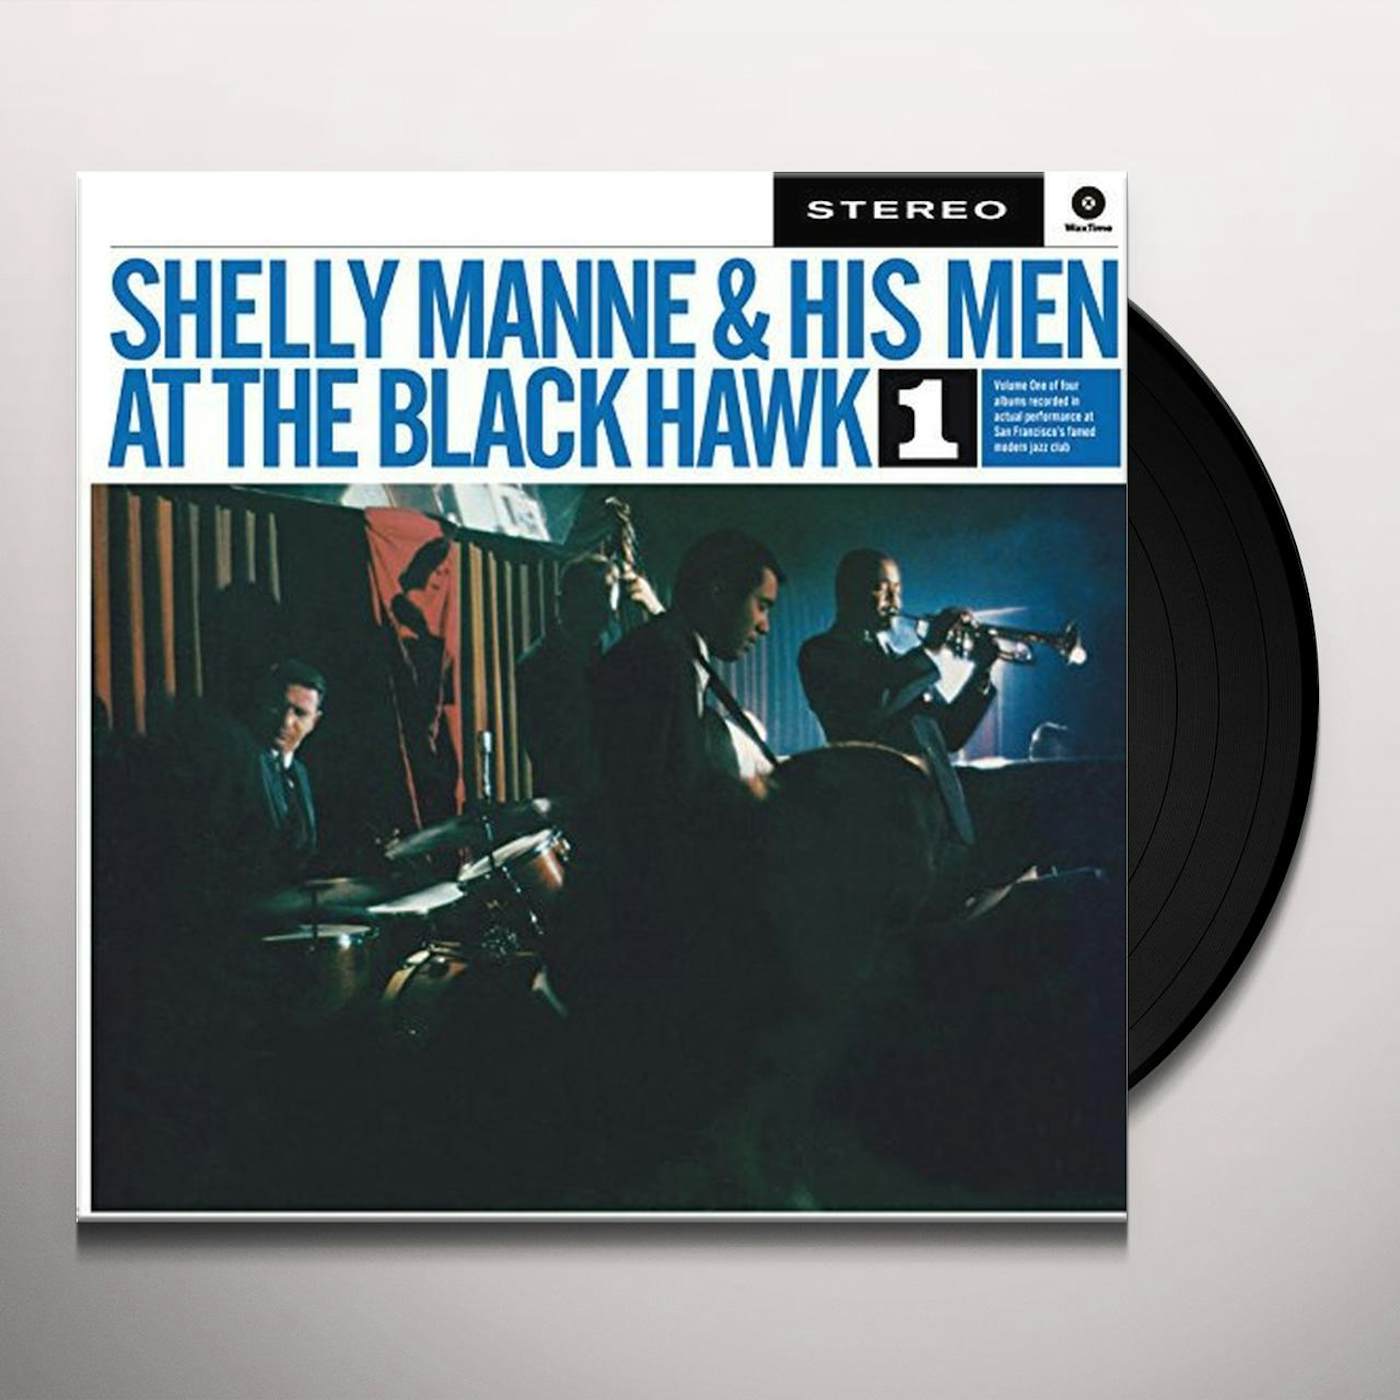 Shelly Manne & His Men AT THE BLACK HAWK 1 Vinyl Record - Spain Release